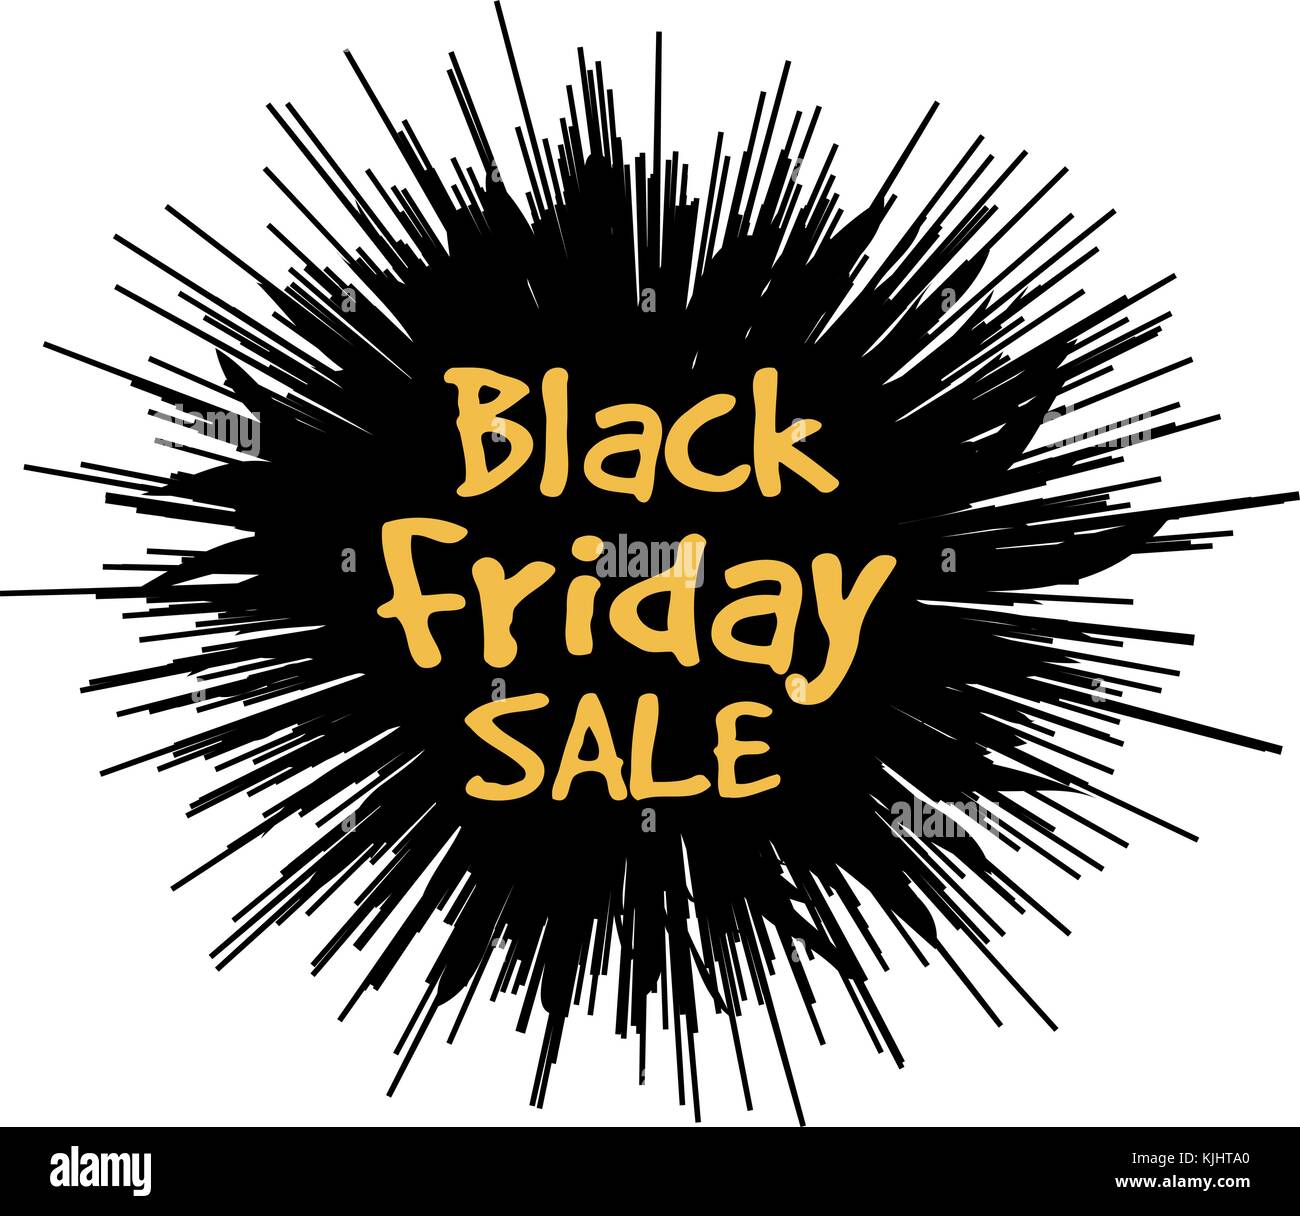 Black Friday in the form of a star drawn in the explosion in the background Stock Vector